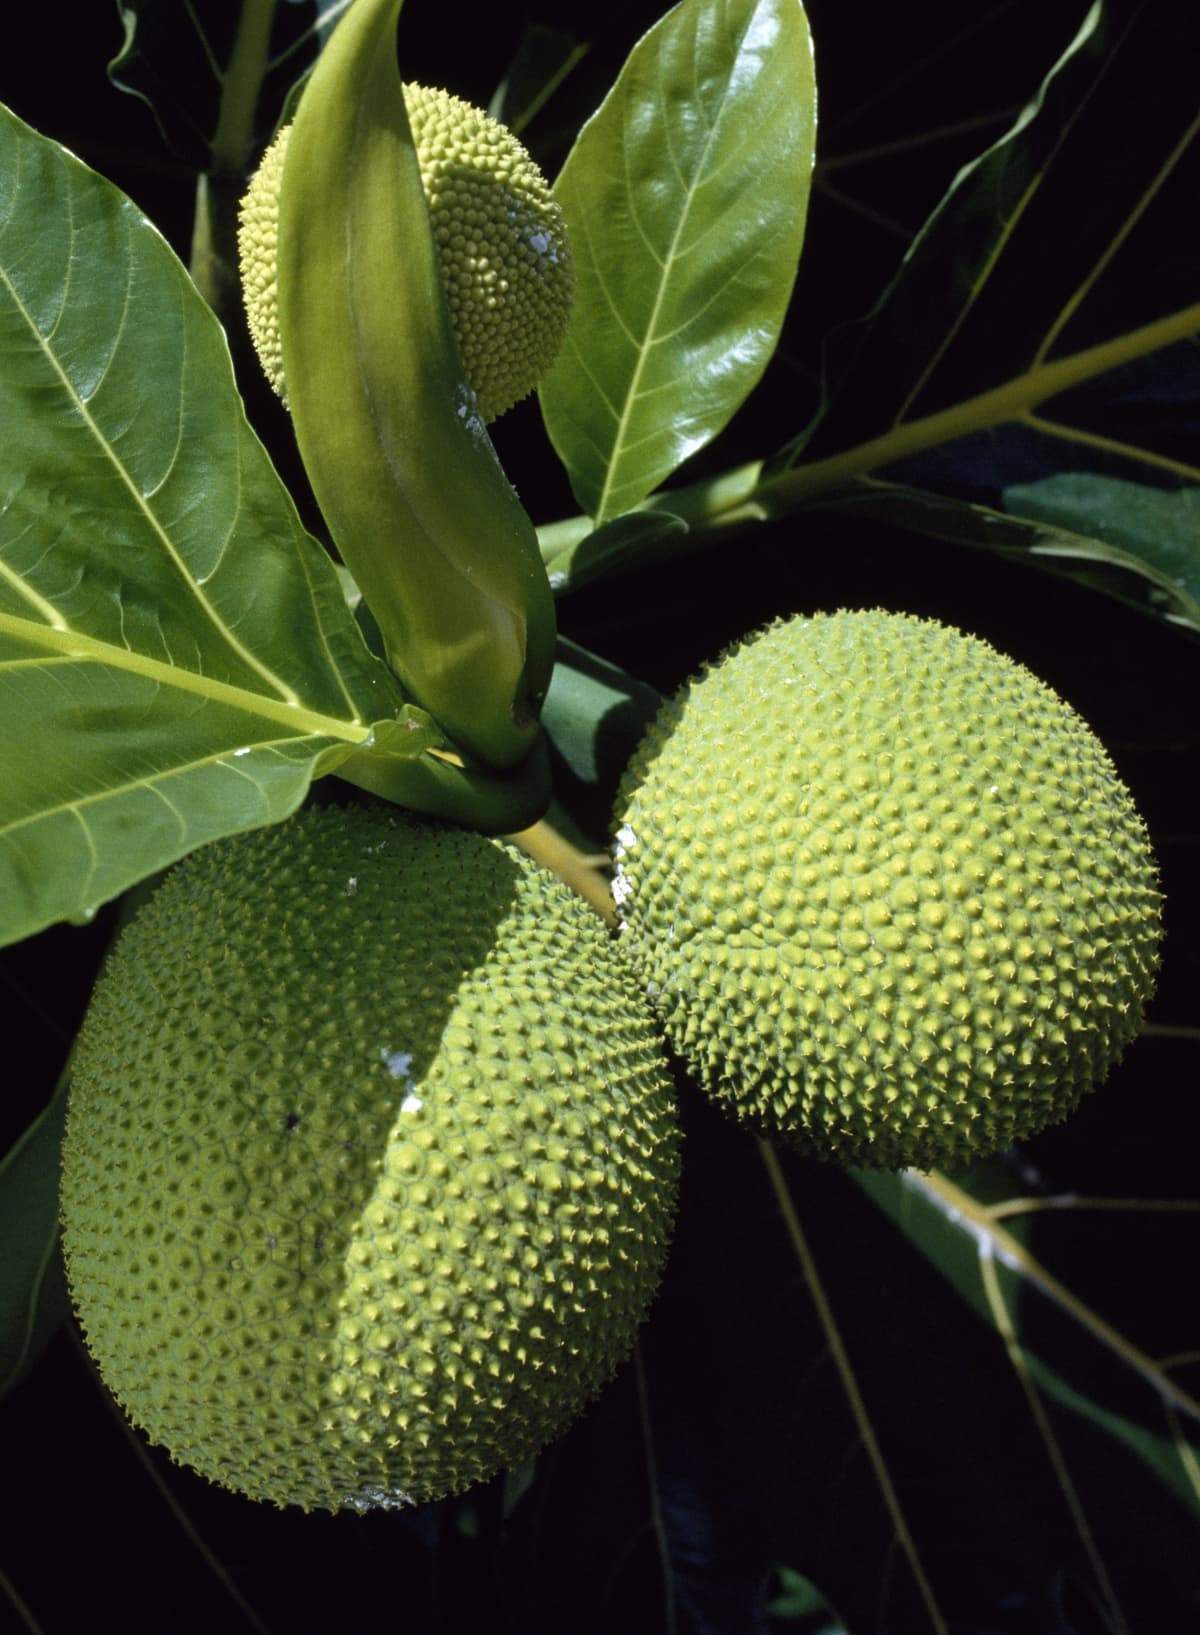 FRENCH POLYNESIA - OCTOBER 17: Fruit of the Breadfruit (Artocarpus altilis), Moraceae, French Polynesia (French Overseas Territory). (Photo by DeAgostini/Getty Images)